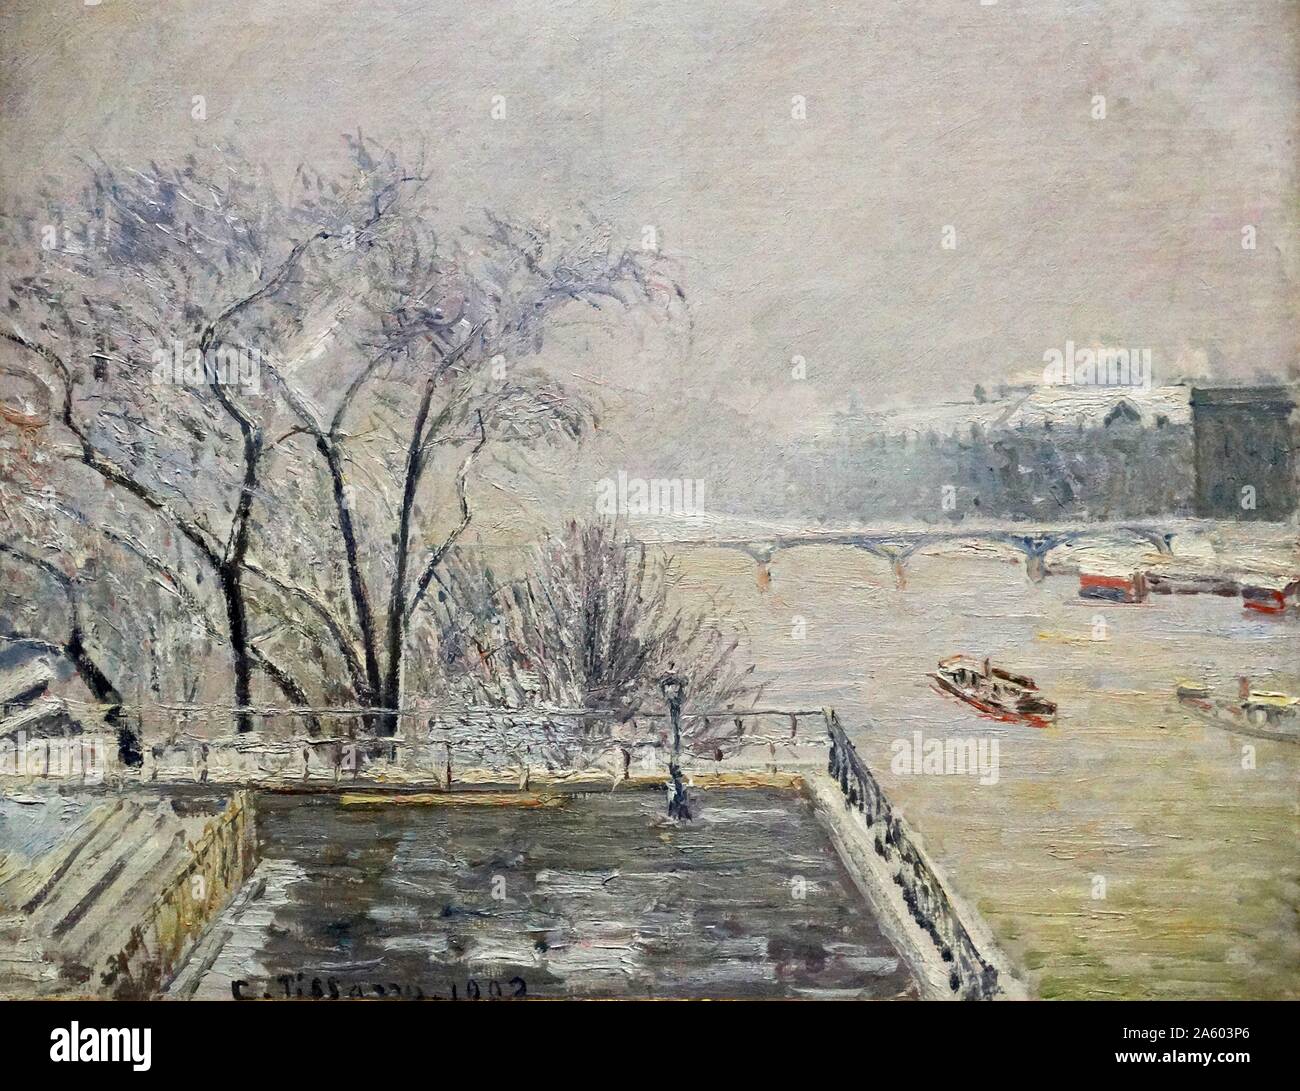 Painting titled 'The Louvre under Snow' by Camille Pissarro (1830-1903) a Danish-French Impressionist and Neo-Impressionist painter. Dated 20th Century Stock Photo